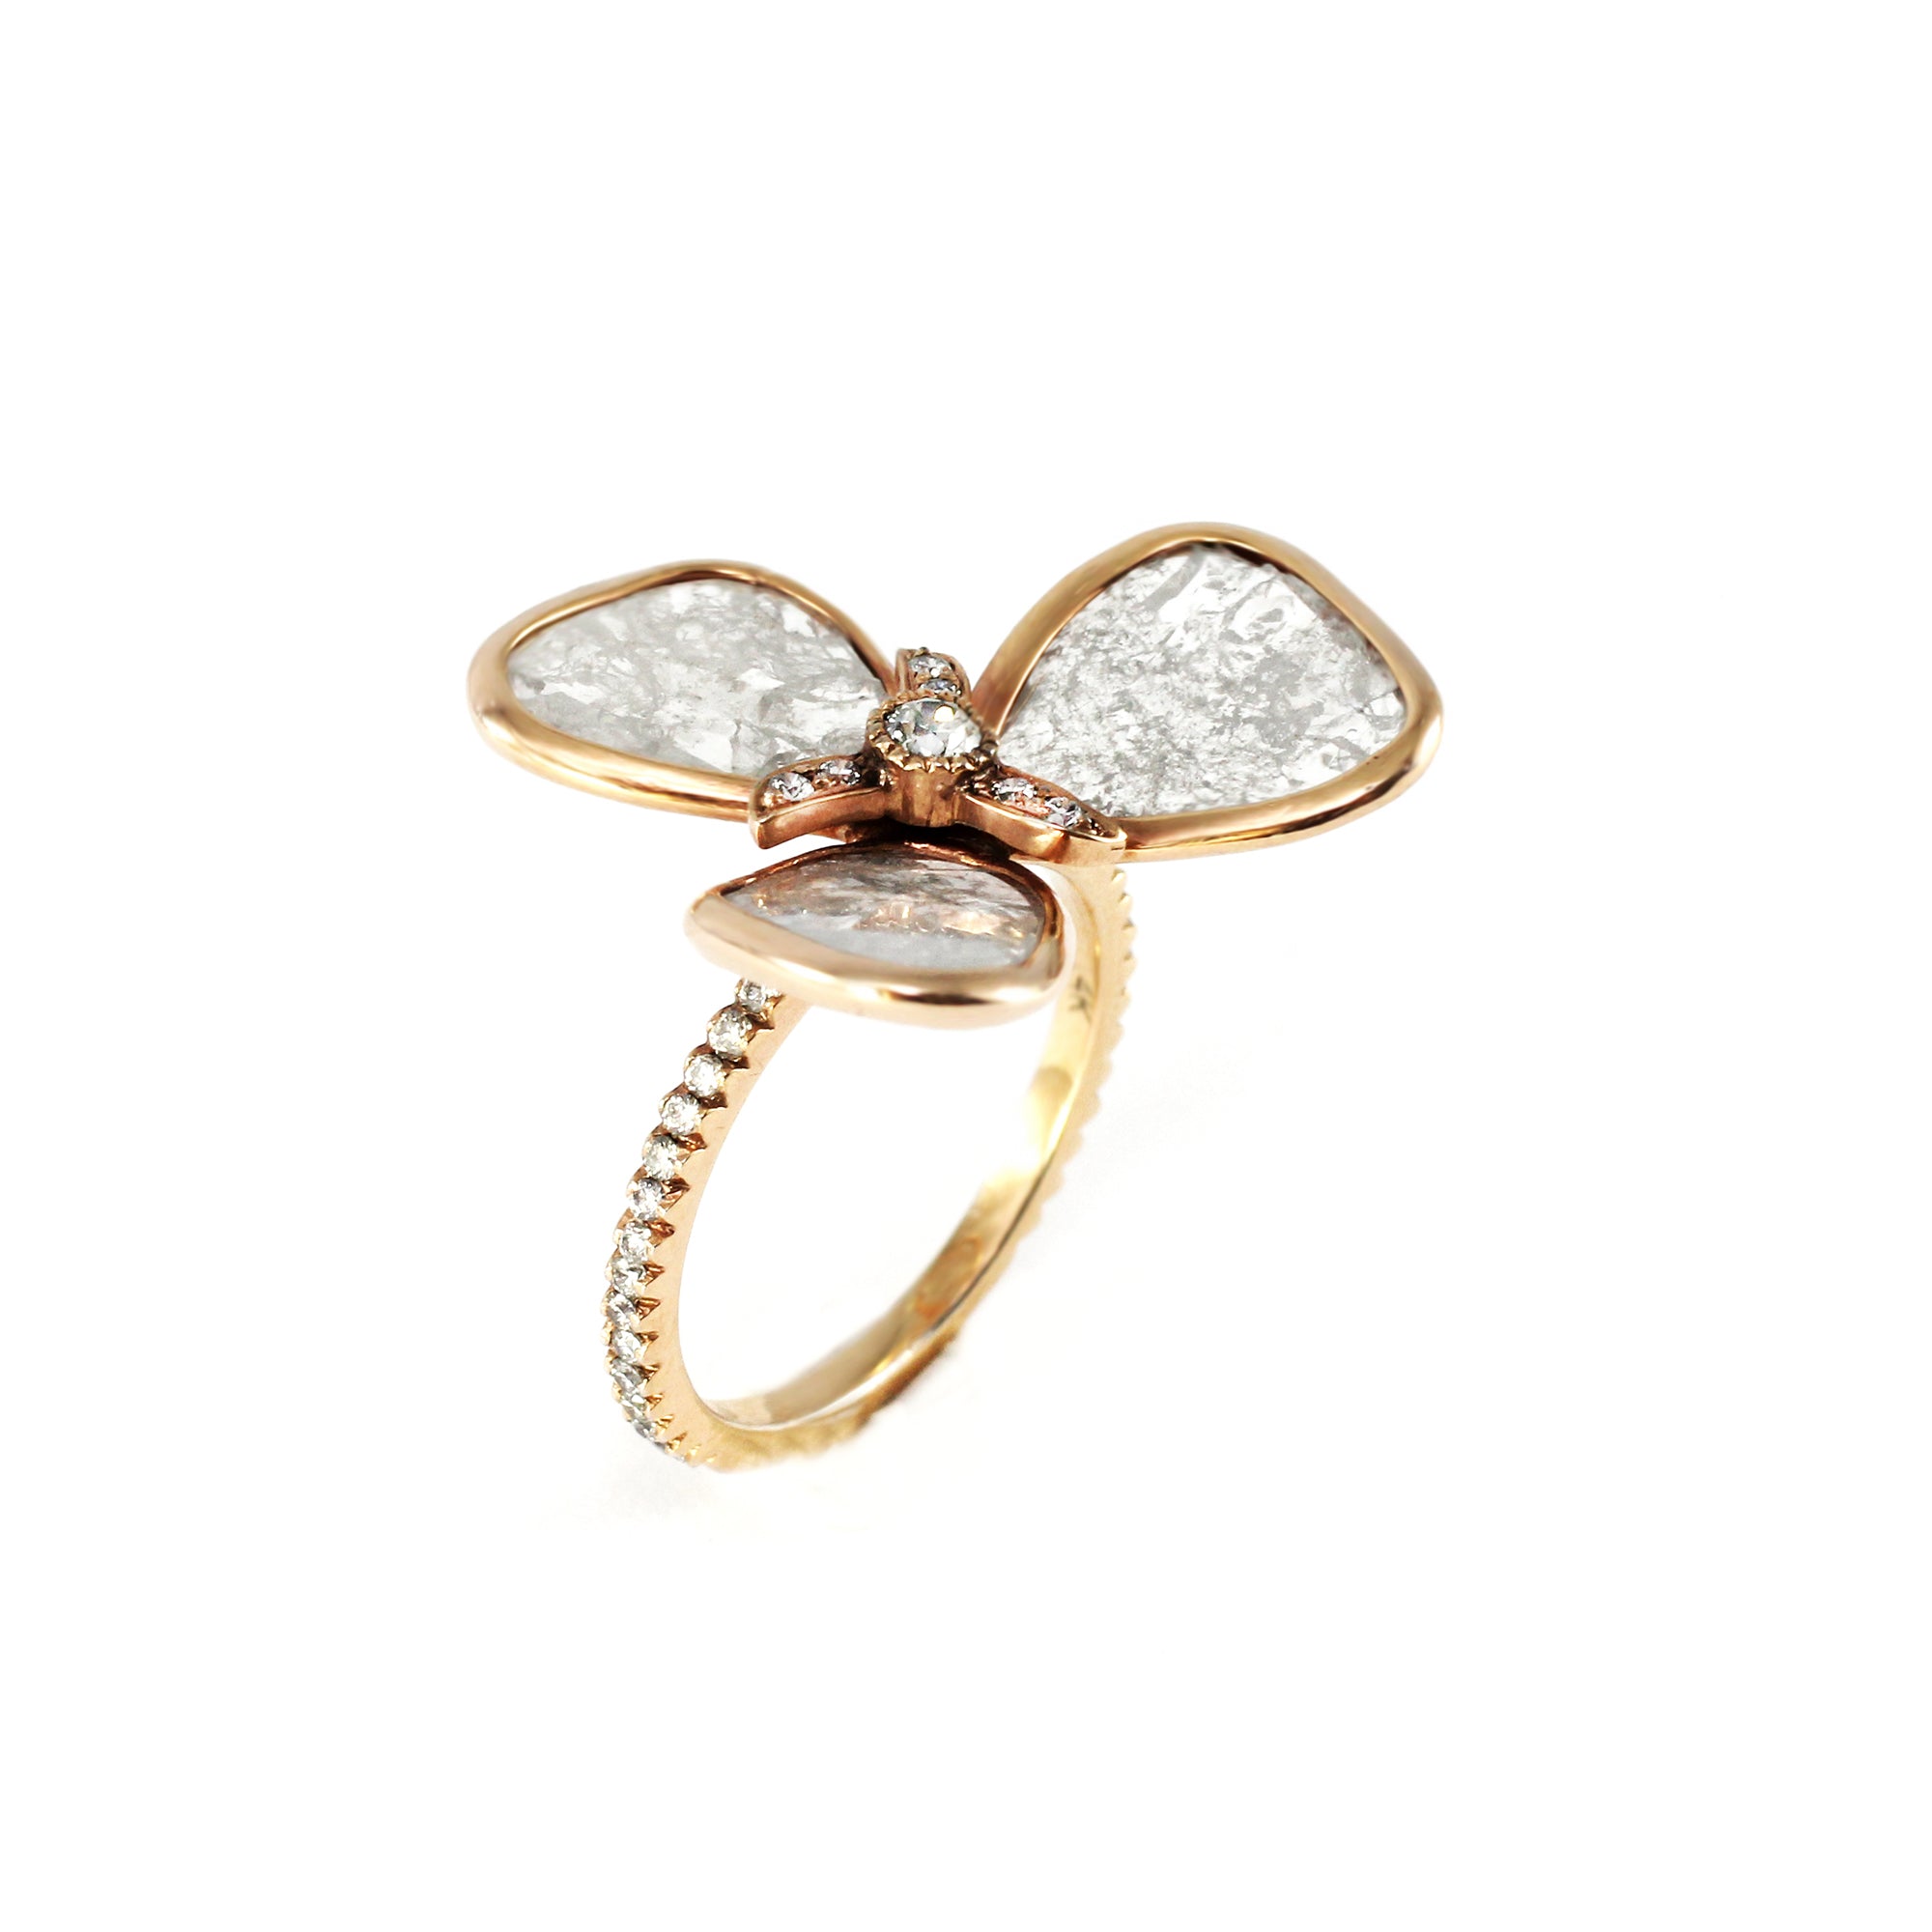 Grey Diamond Slice Flower Ring by Vivaan - Rose Gold - Talisman Collection Fine Jewelers